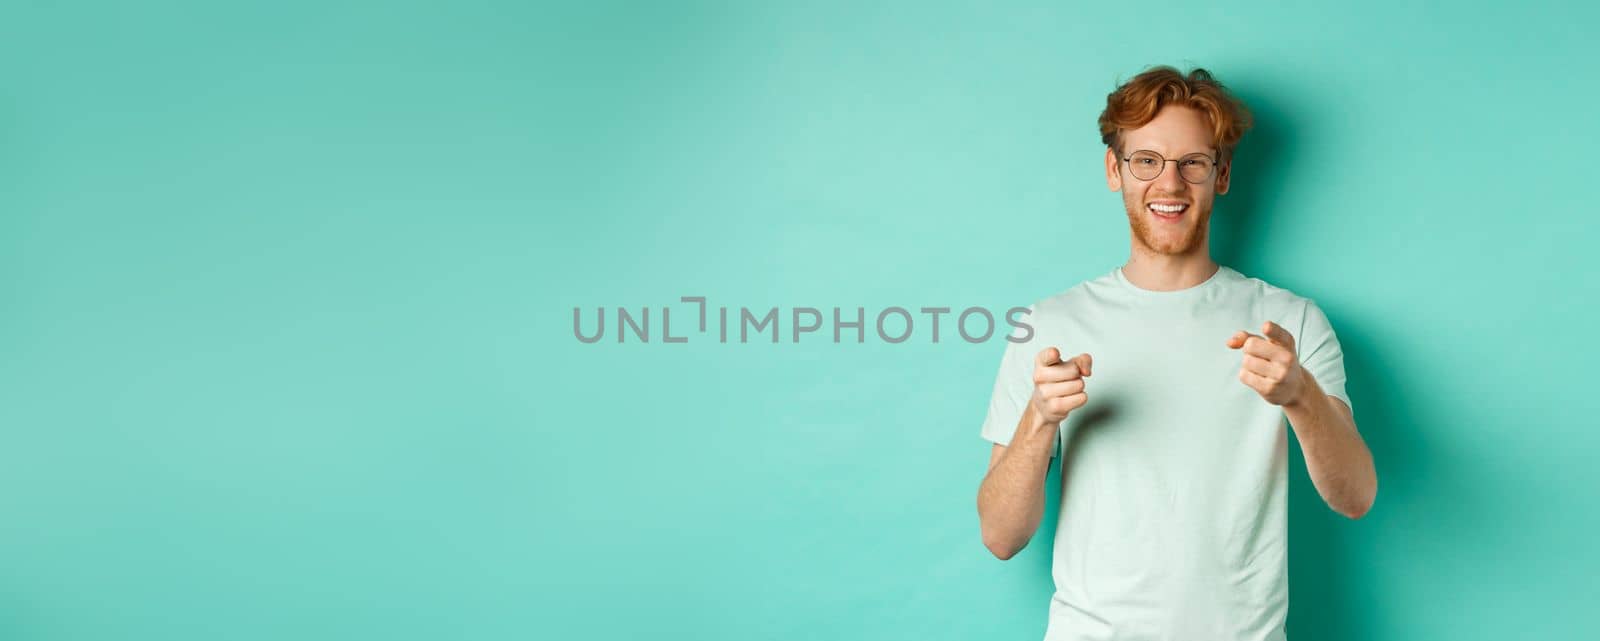 Handsome young man with ginger hair, wearing glasses and t-shirt, pointing finger at camera and smiling, choosing you, congratulating or praising, standing over mint background.